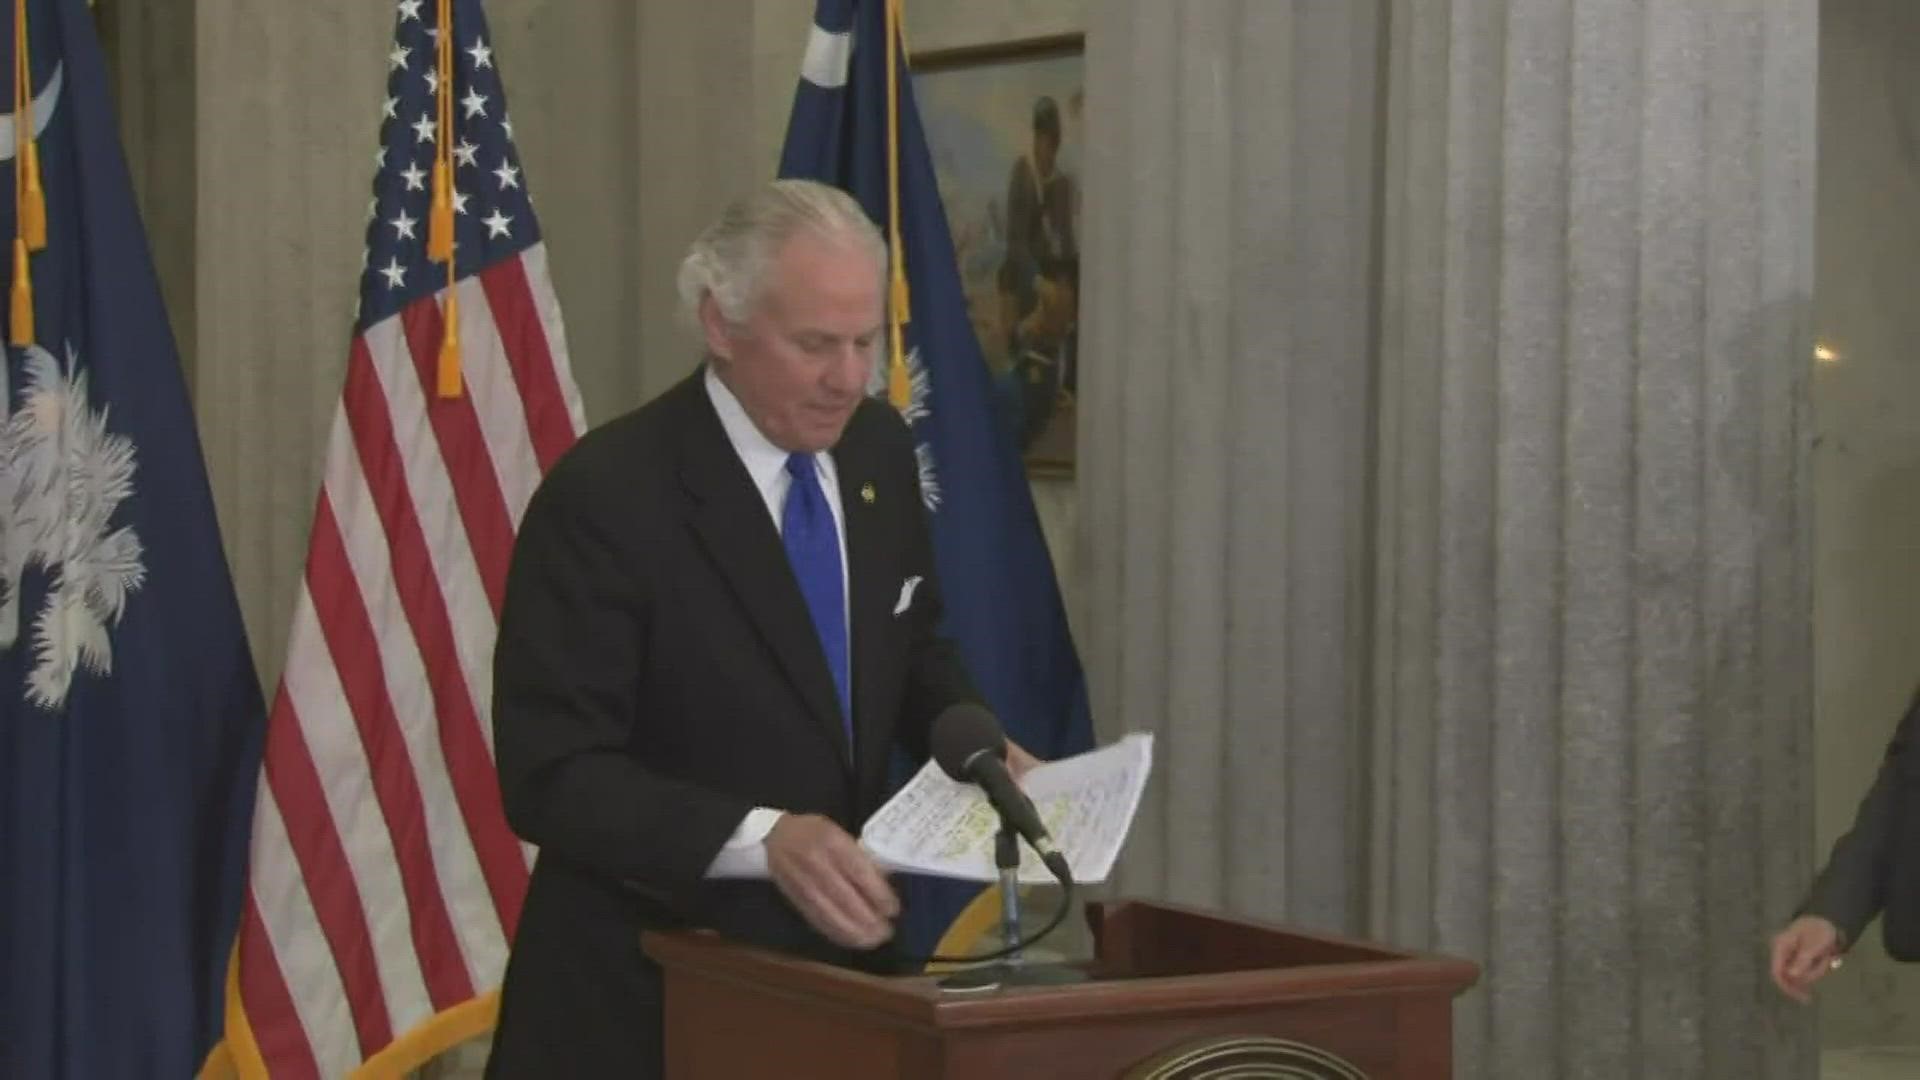 South Carolina Gov. Henry McMaster said he's going to work to speed up the rollout of the vaccine, including imposing a new deadline.